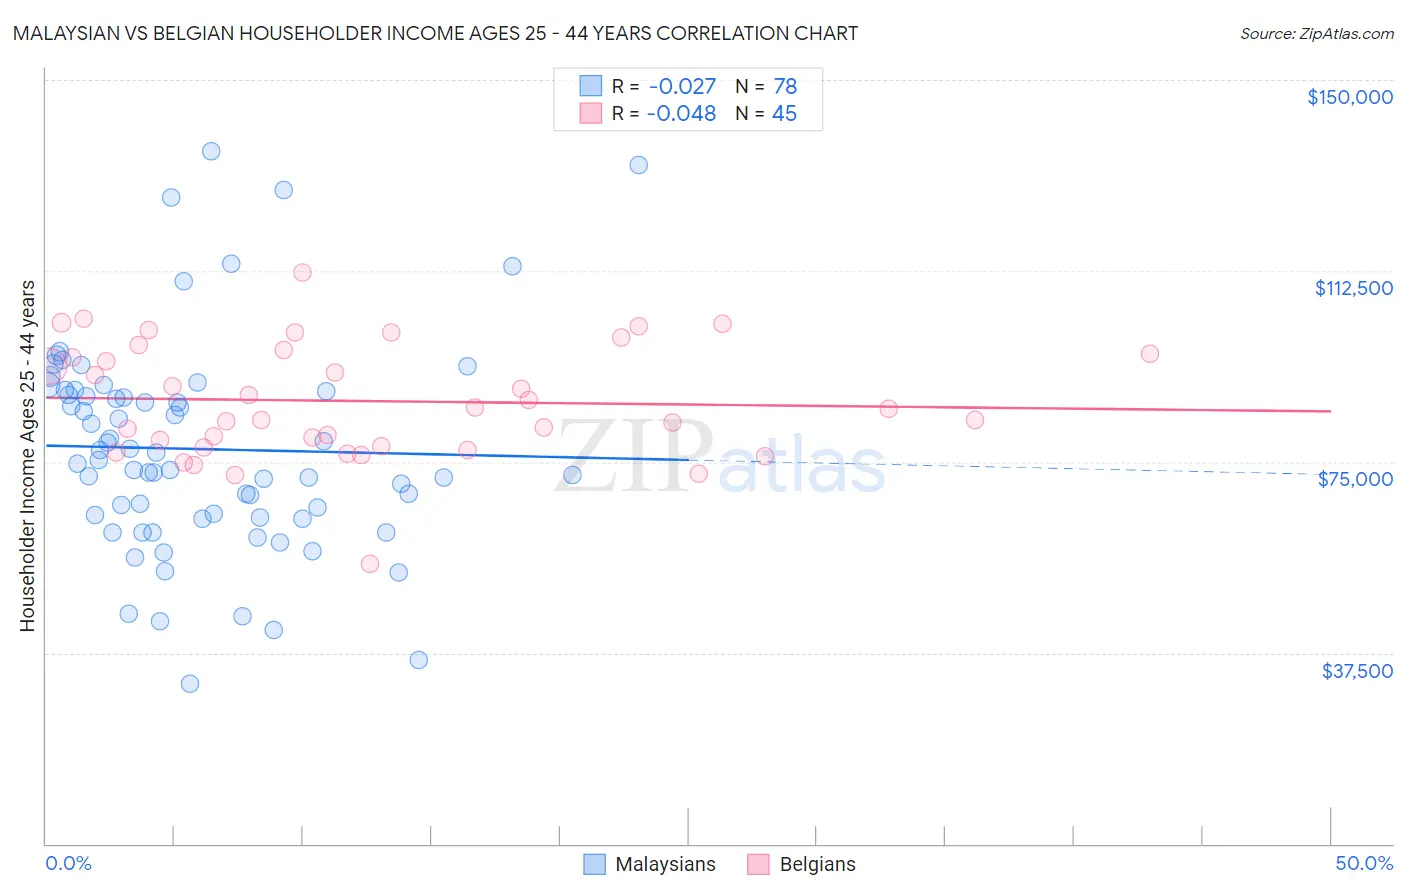 Malaysian vs Belgian Householder Income Ages 25 - 44 years